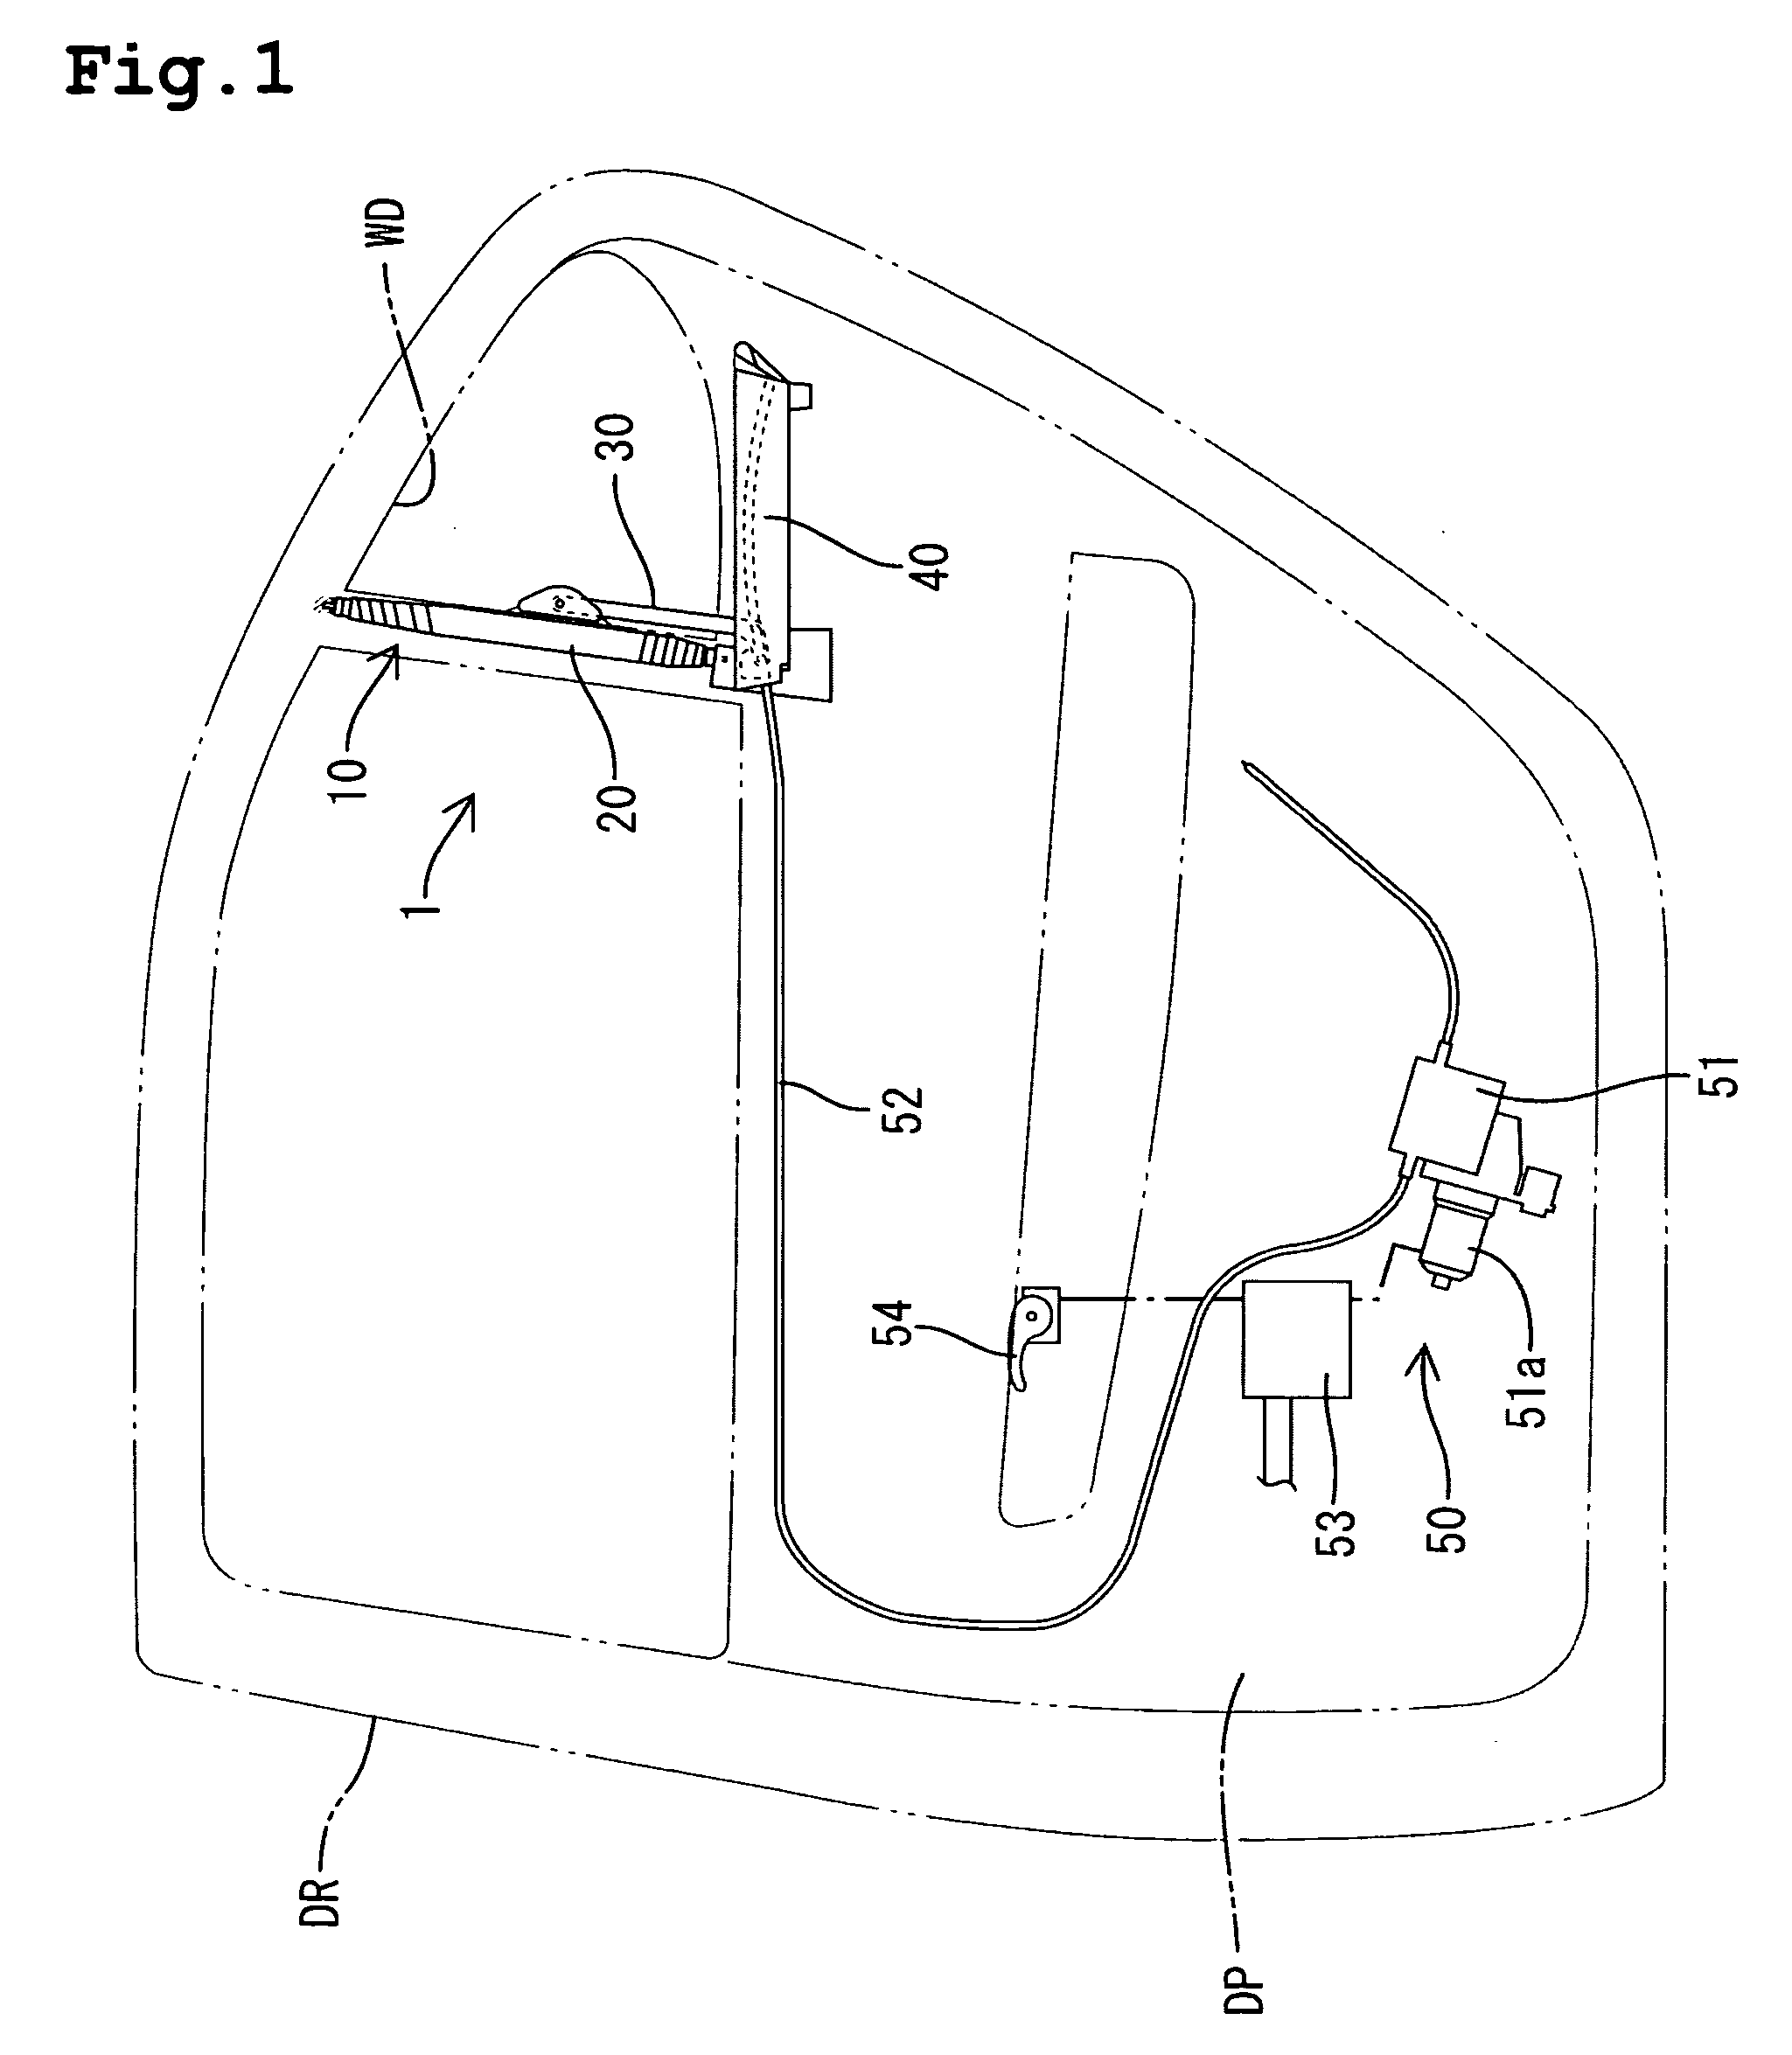 Sunshade actuation device